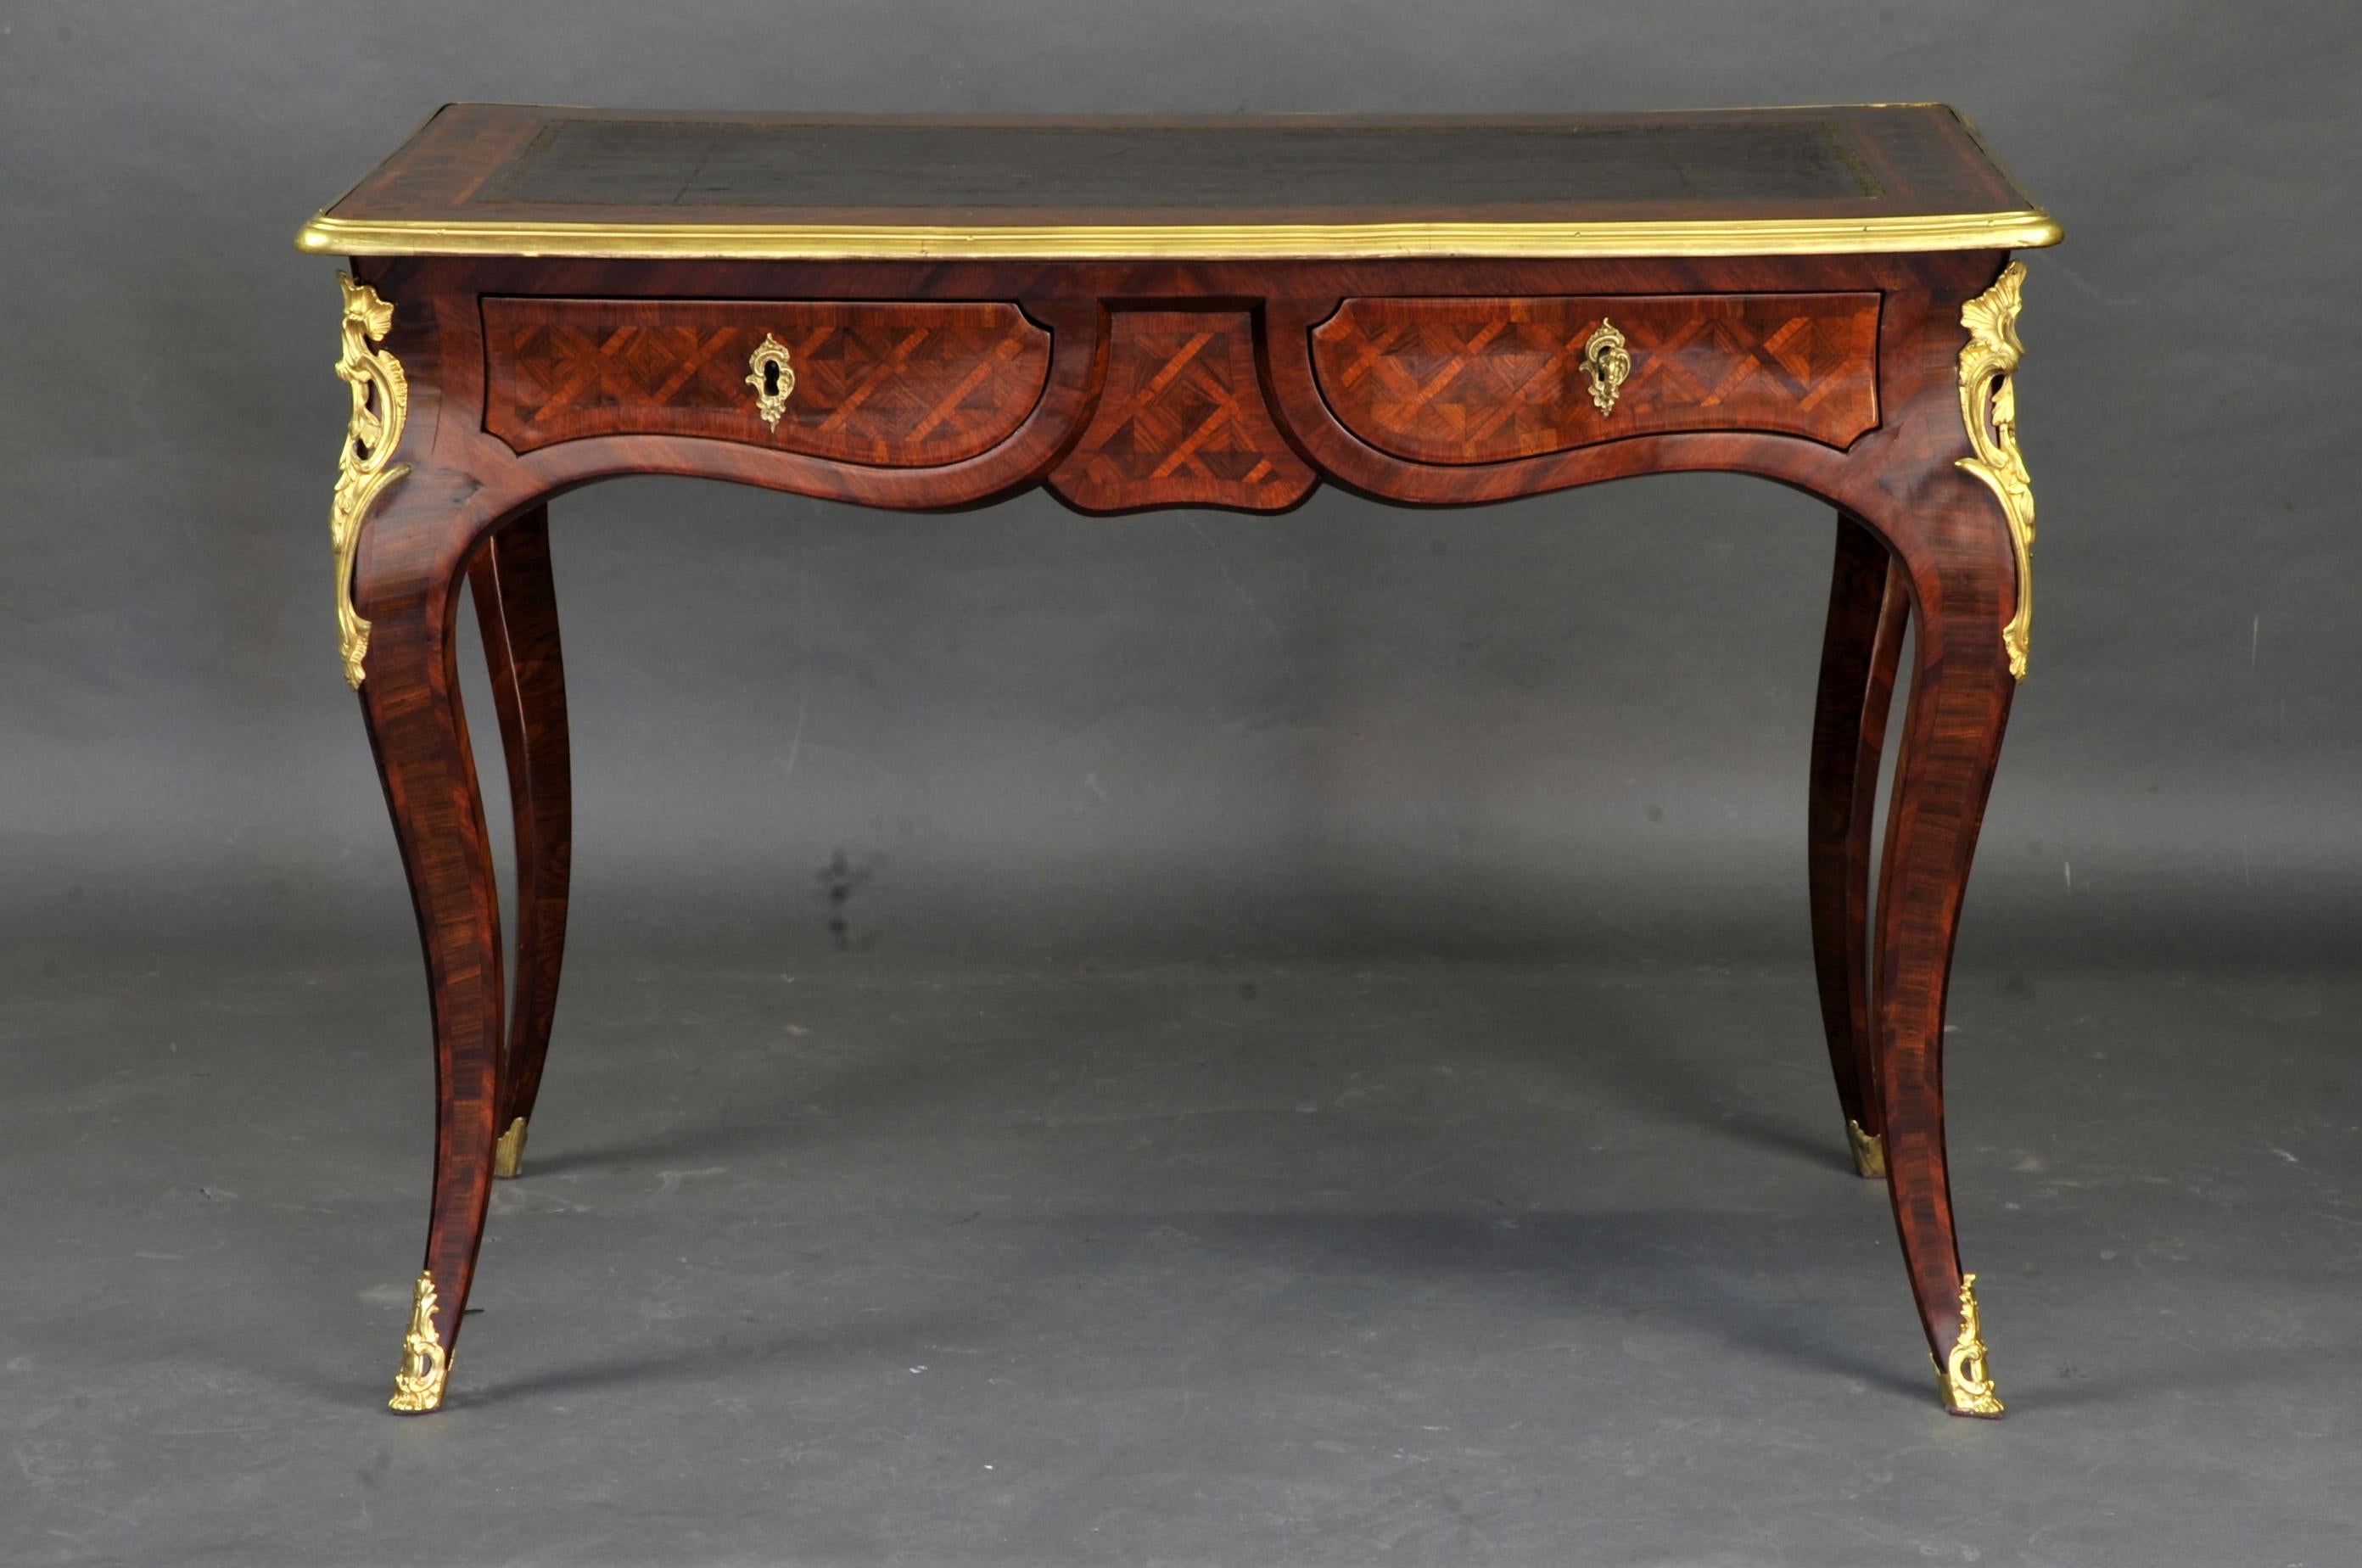 18th Century Lady Louis XV Desk in Violet Wood Marquetry